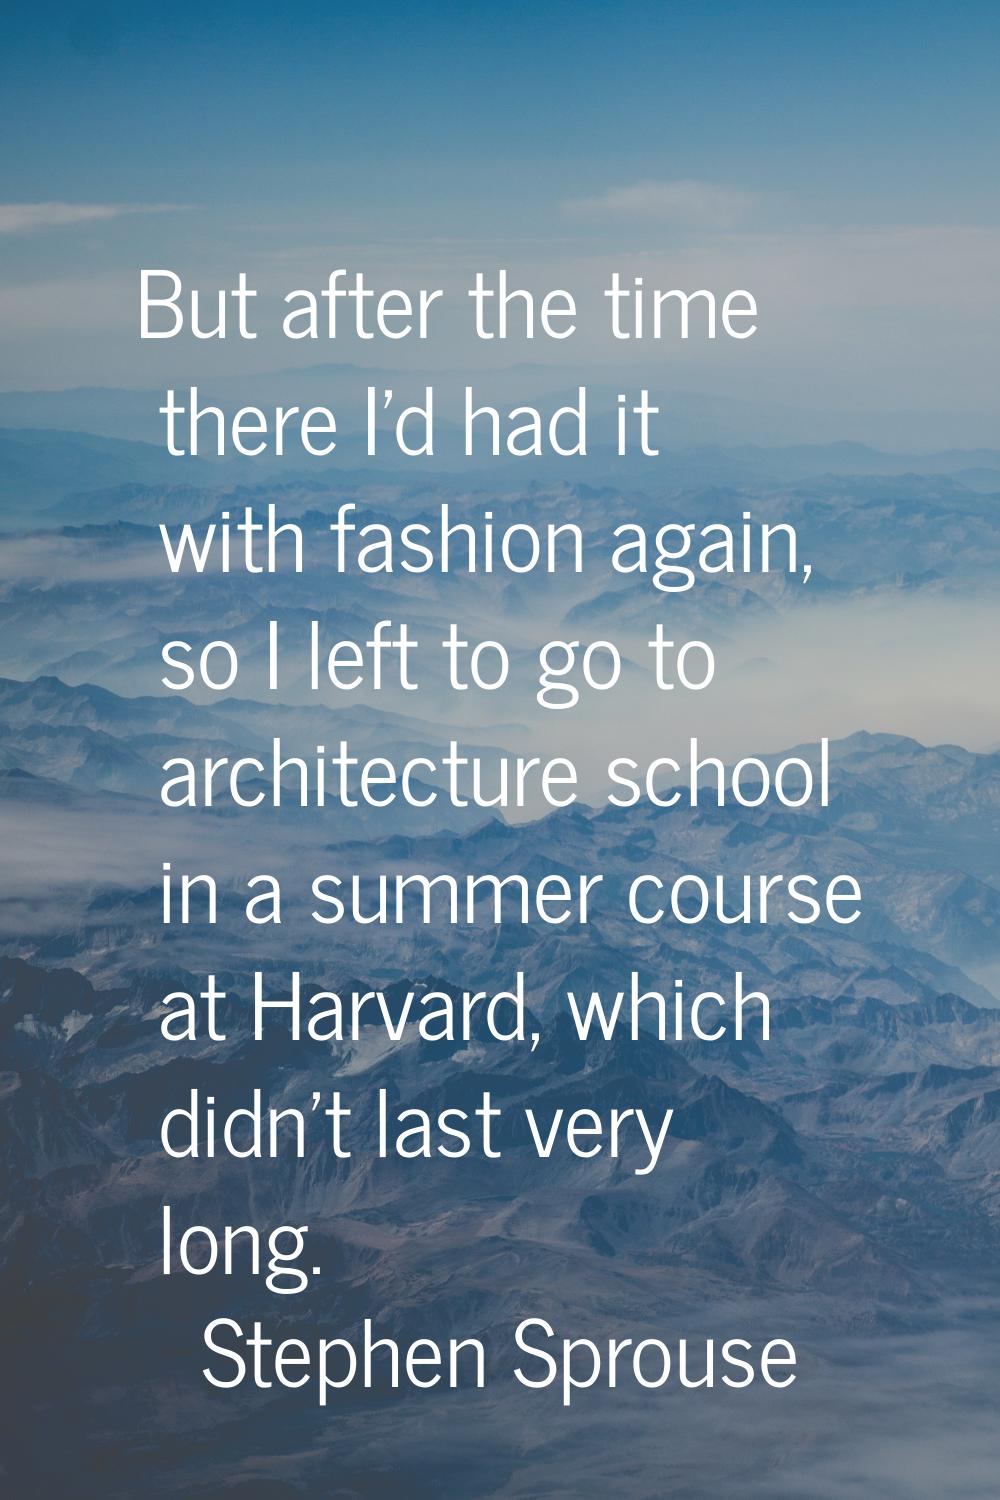 But after the time there I'd had it with fashion again, so I left to go to architecture school in a